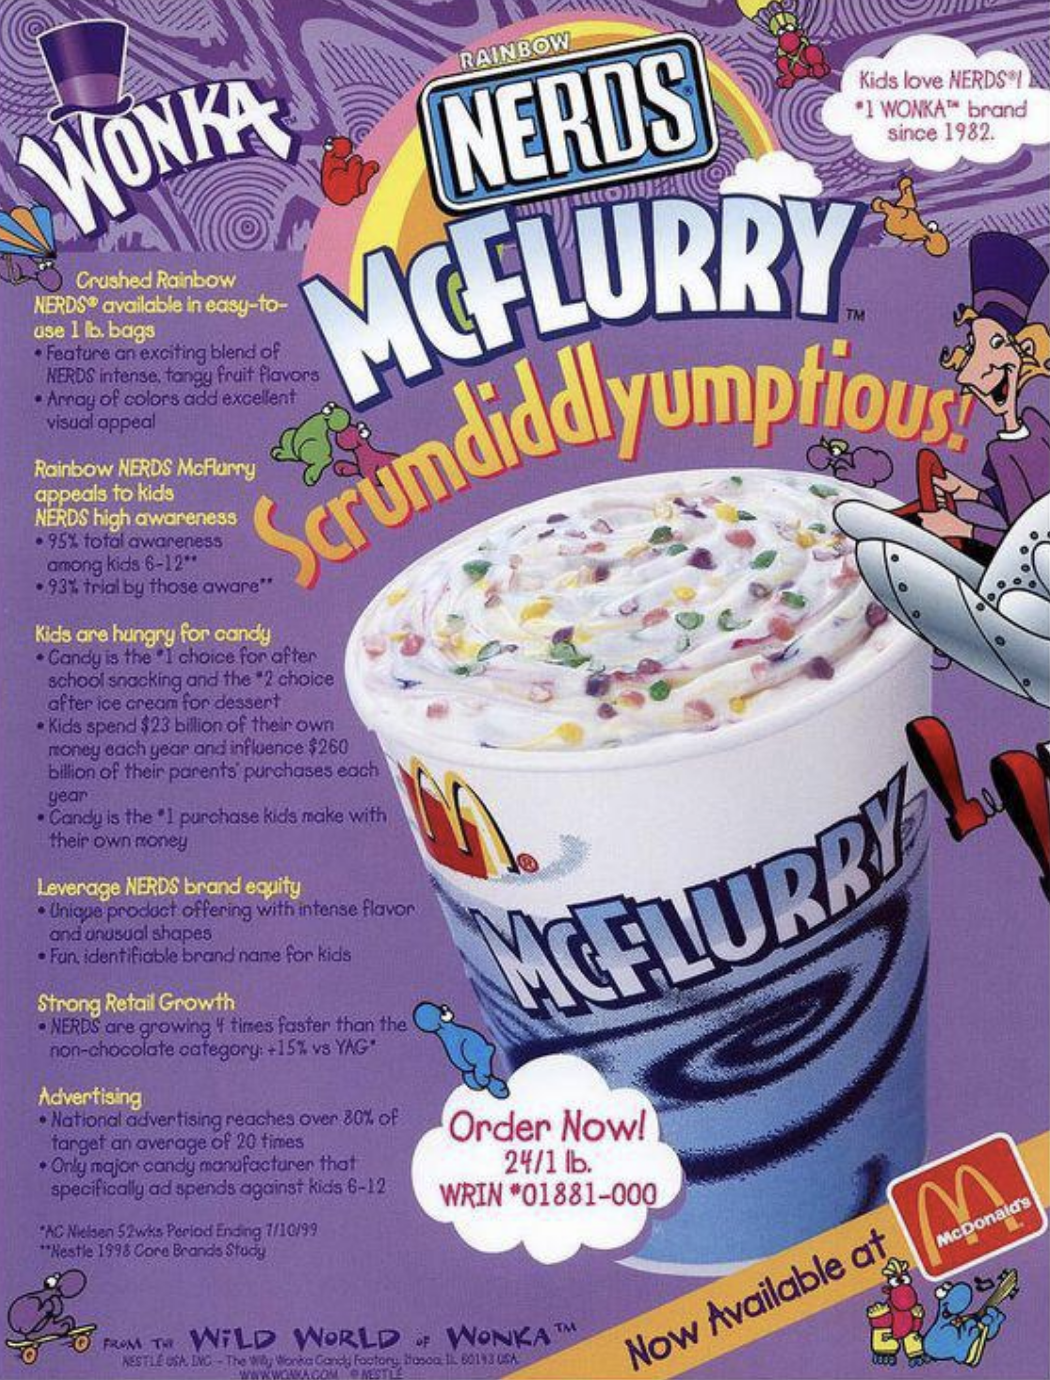 An advertising poster for the Nerds McFlurry